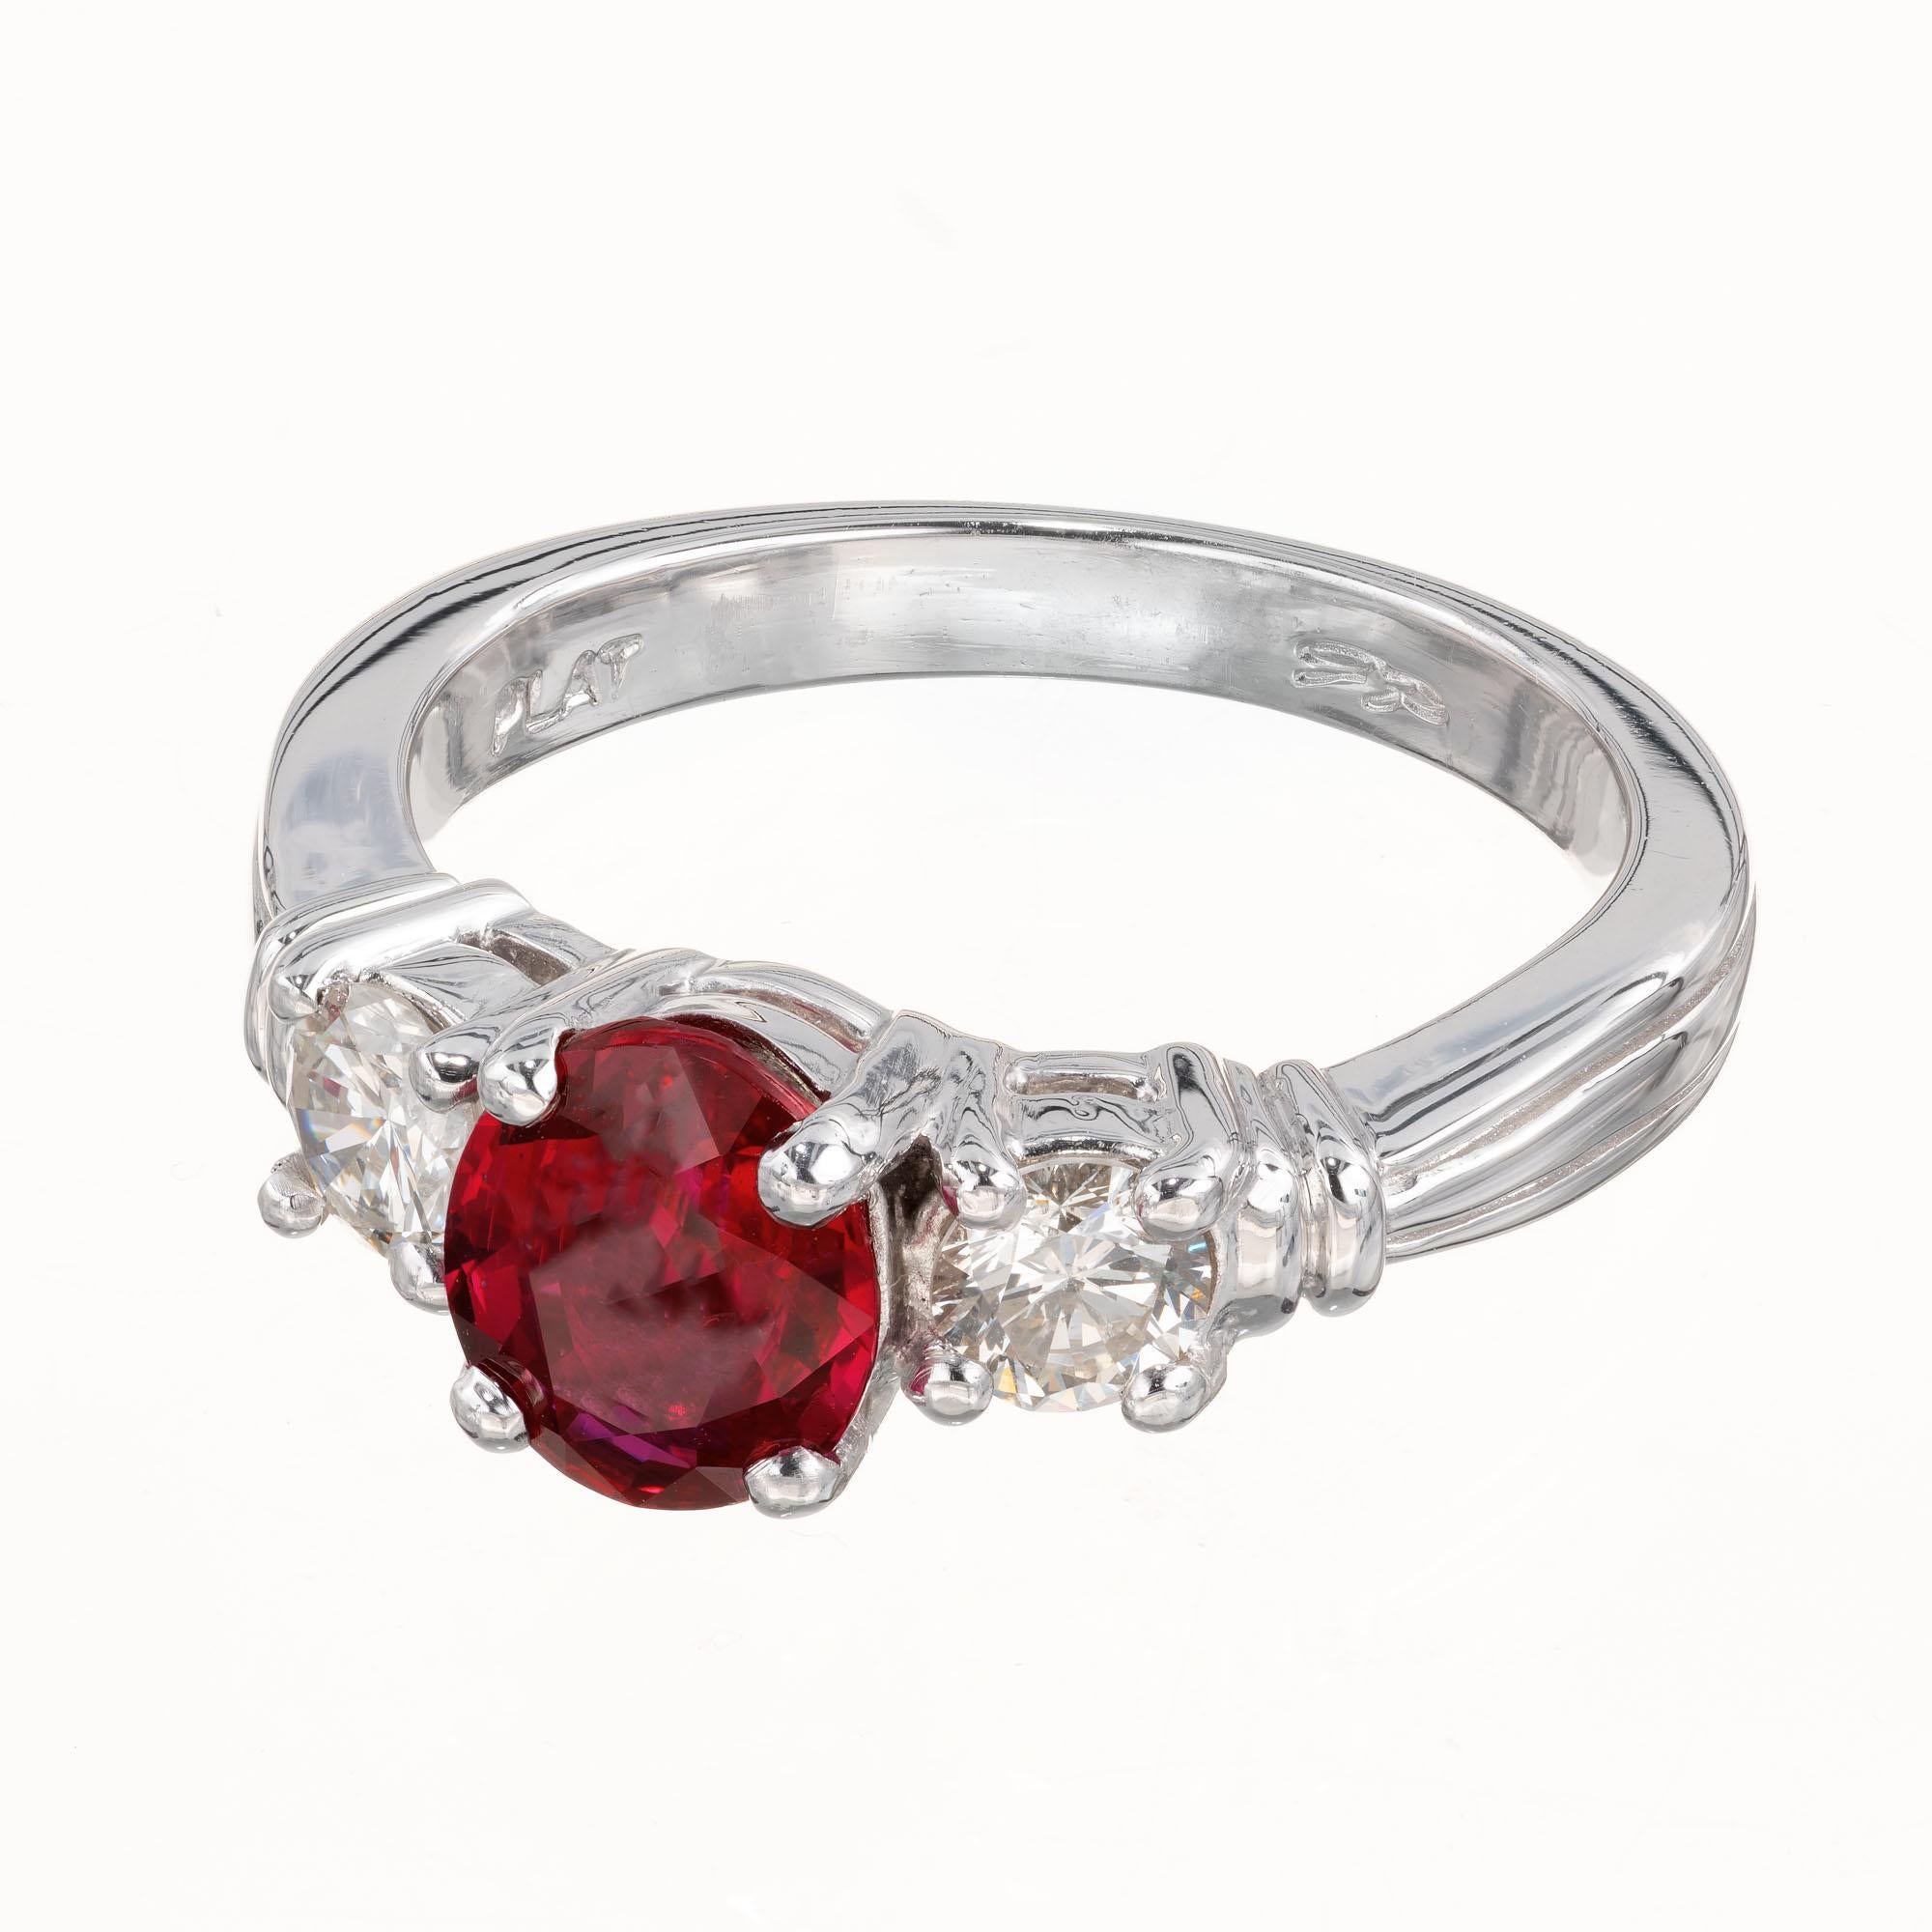 GIA certified no heat no enhancements ruby and diamond enagement ring. Oval ruby center stone with 2 round side diamonds set in a platinum, classic three stone setting. Created in the Peter Suchy Workshop.  

1 oval bright red ruby SI, approx.